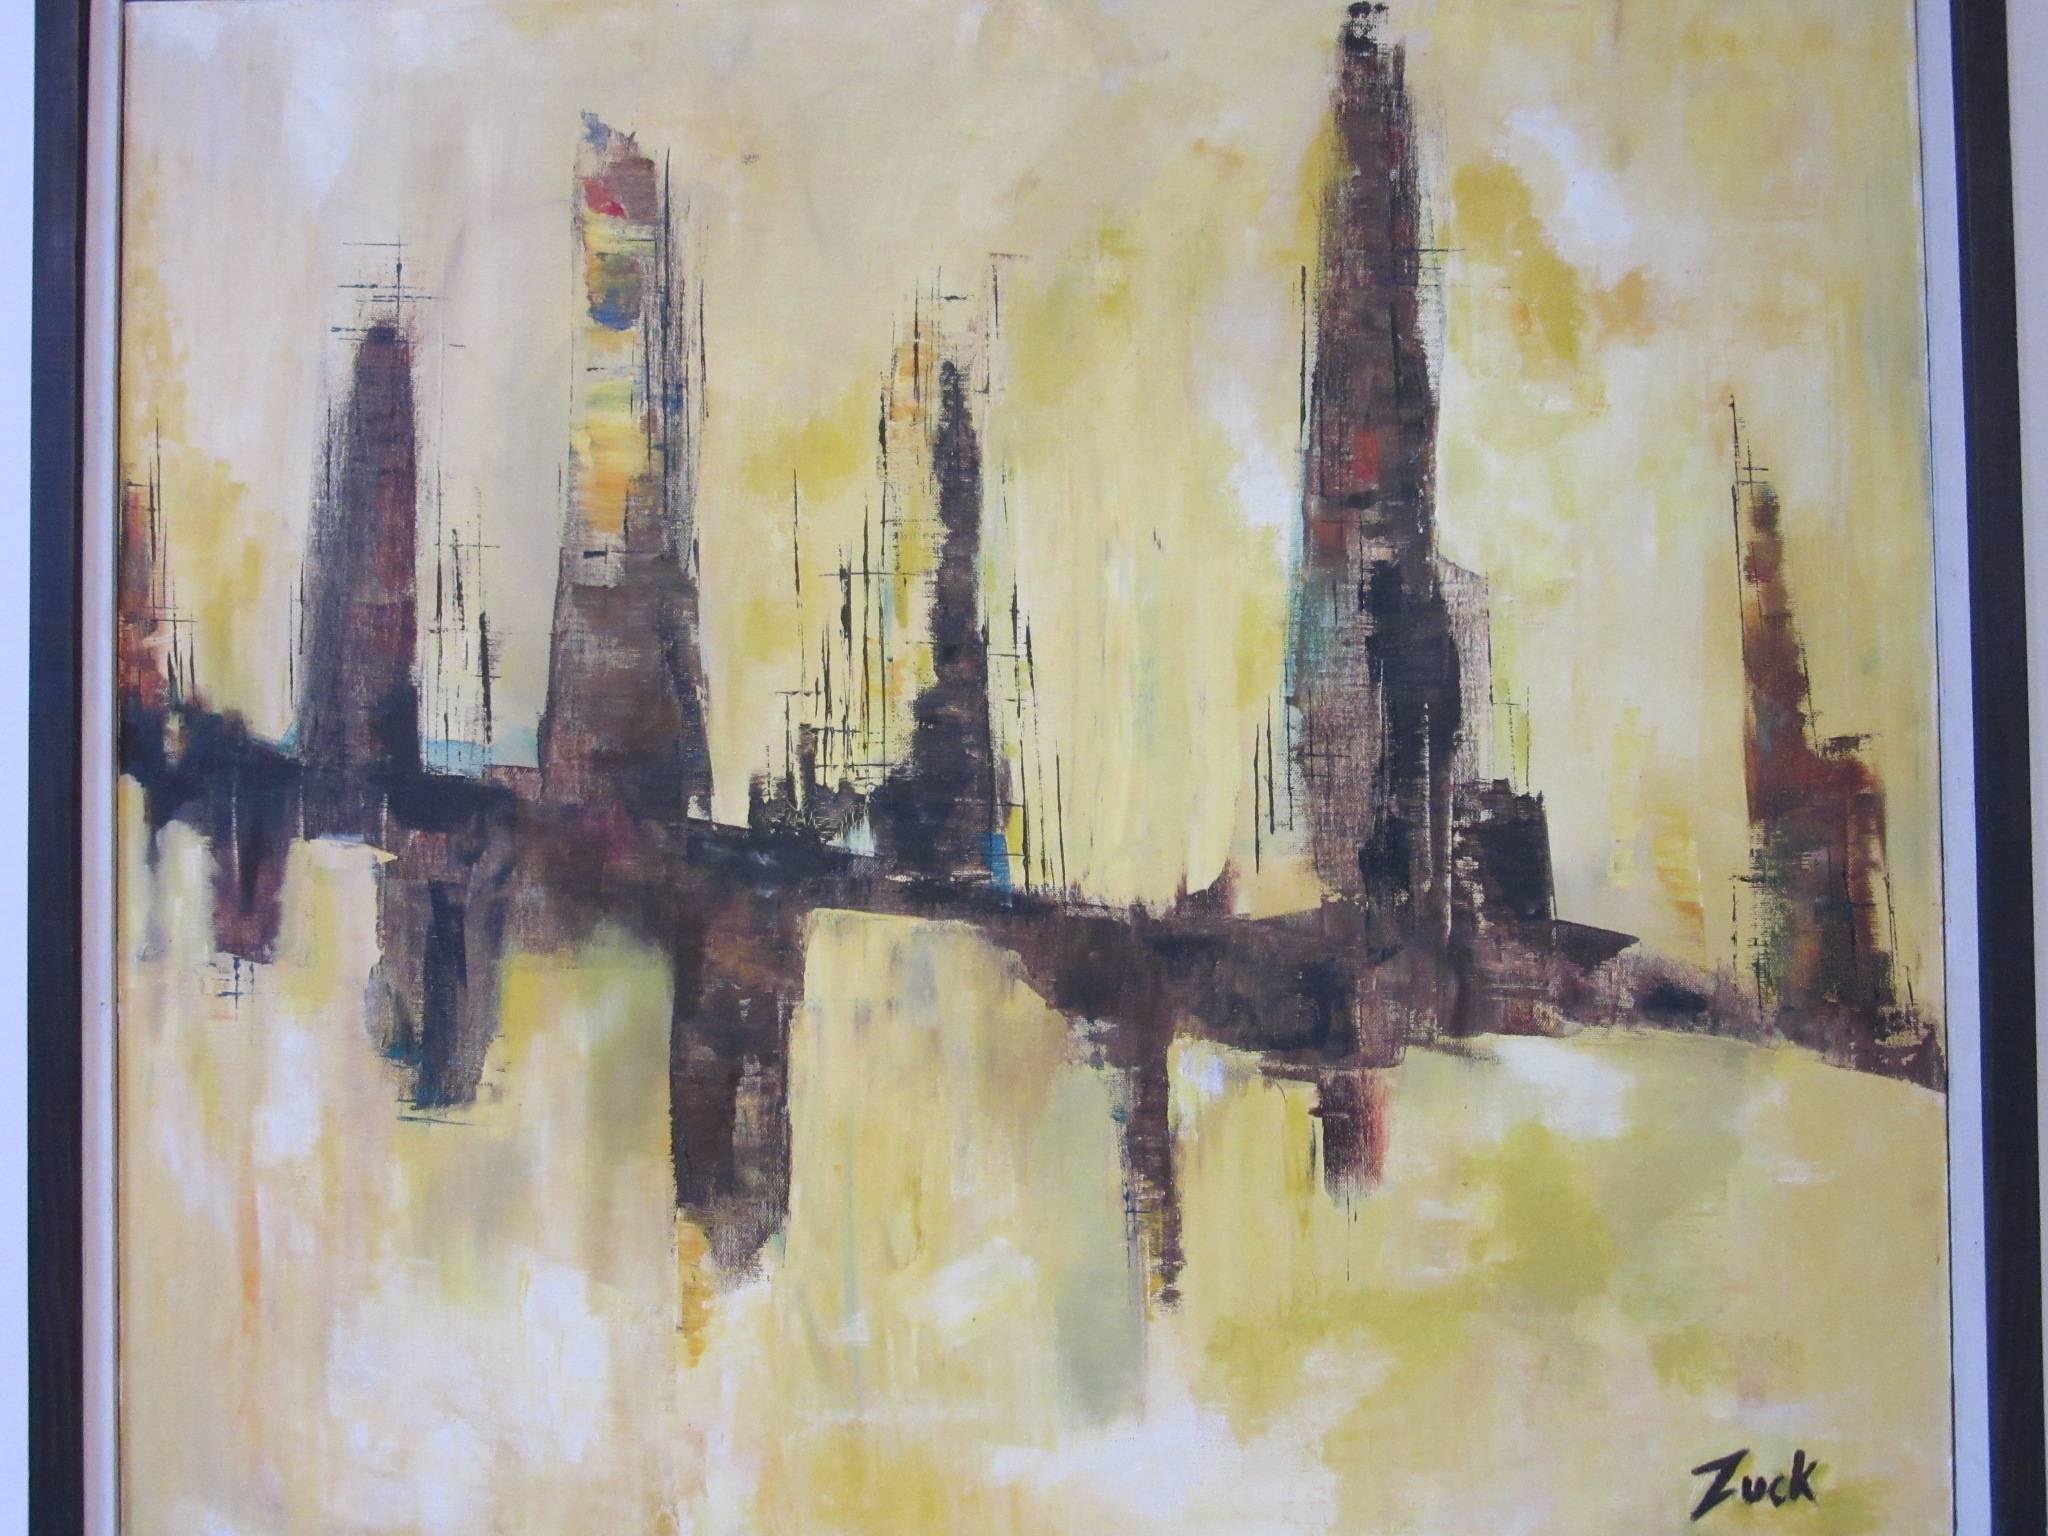 A Mid-Century Modern framed cityscape painting in yellow tones reflecting the skyline titled 